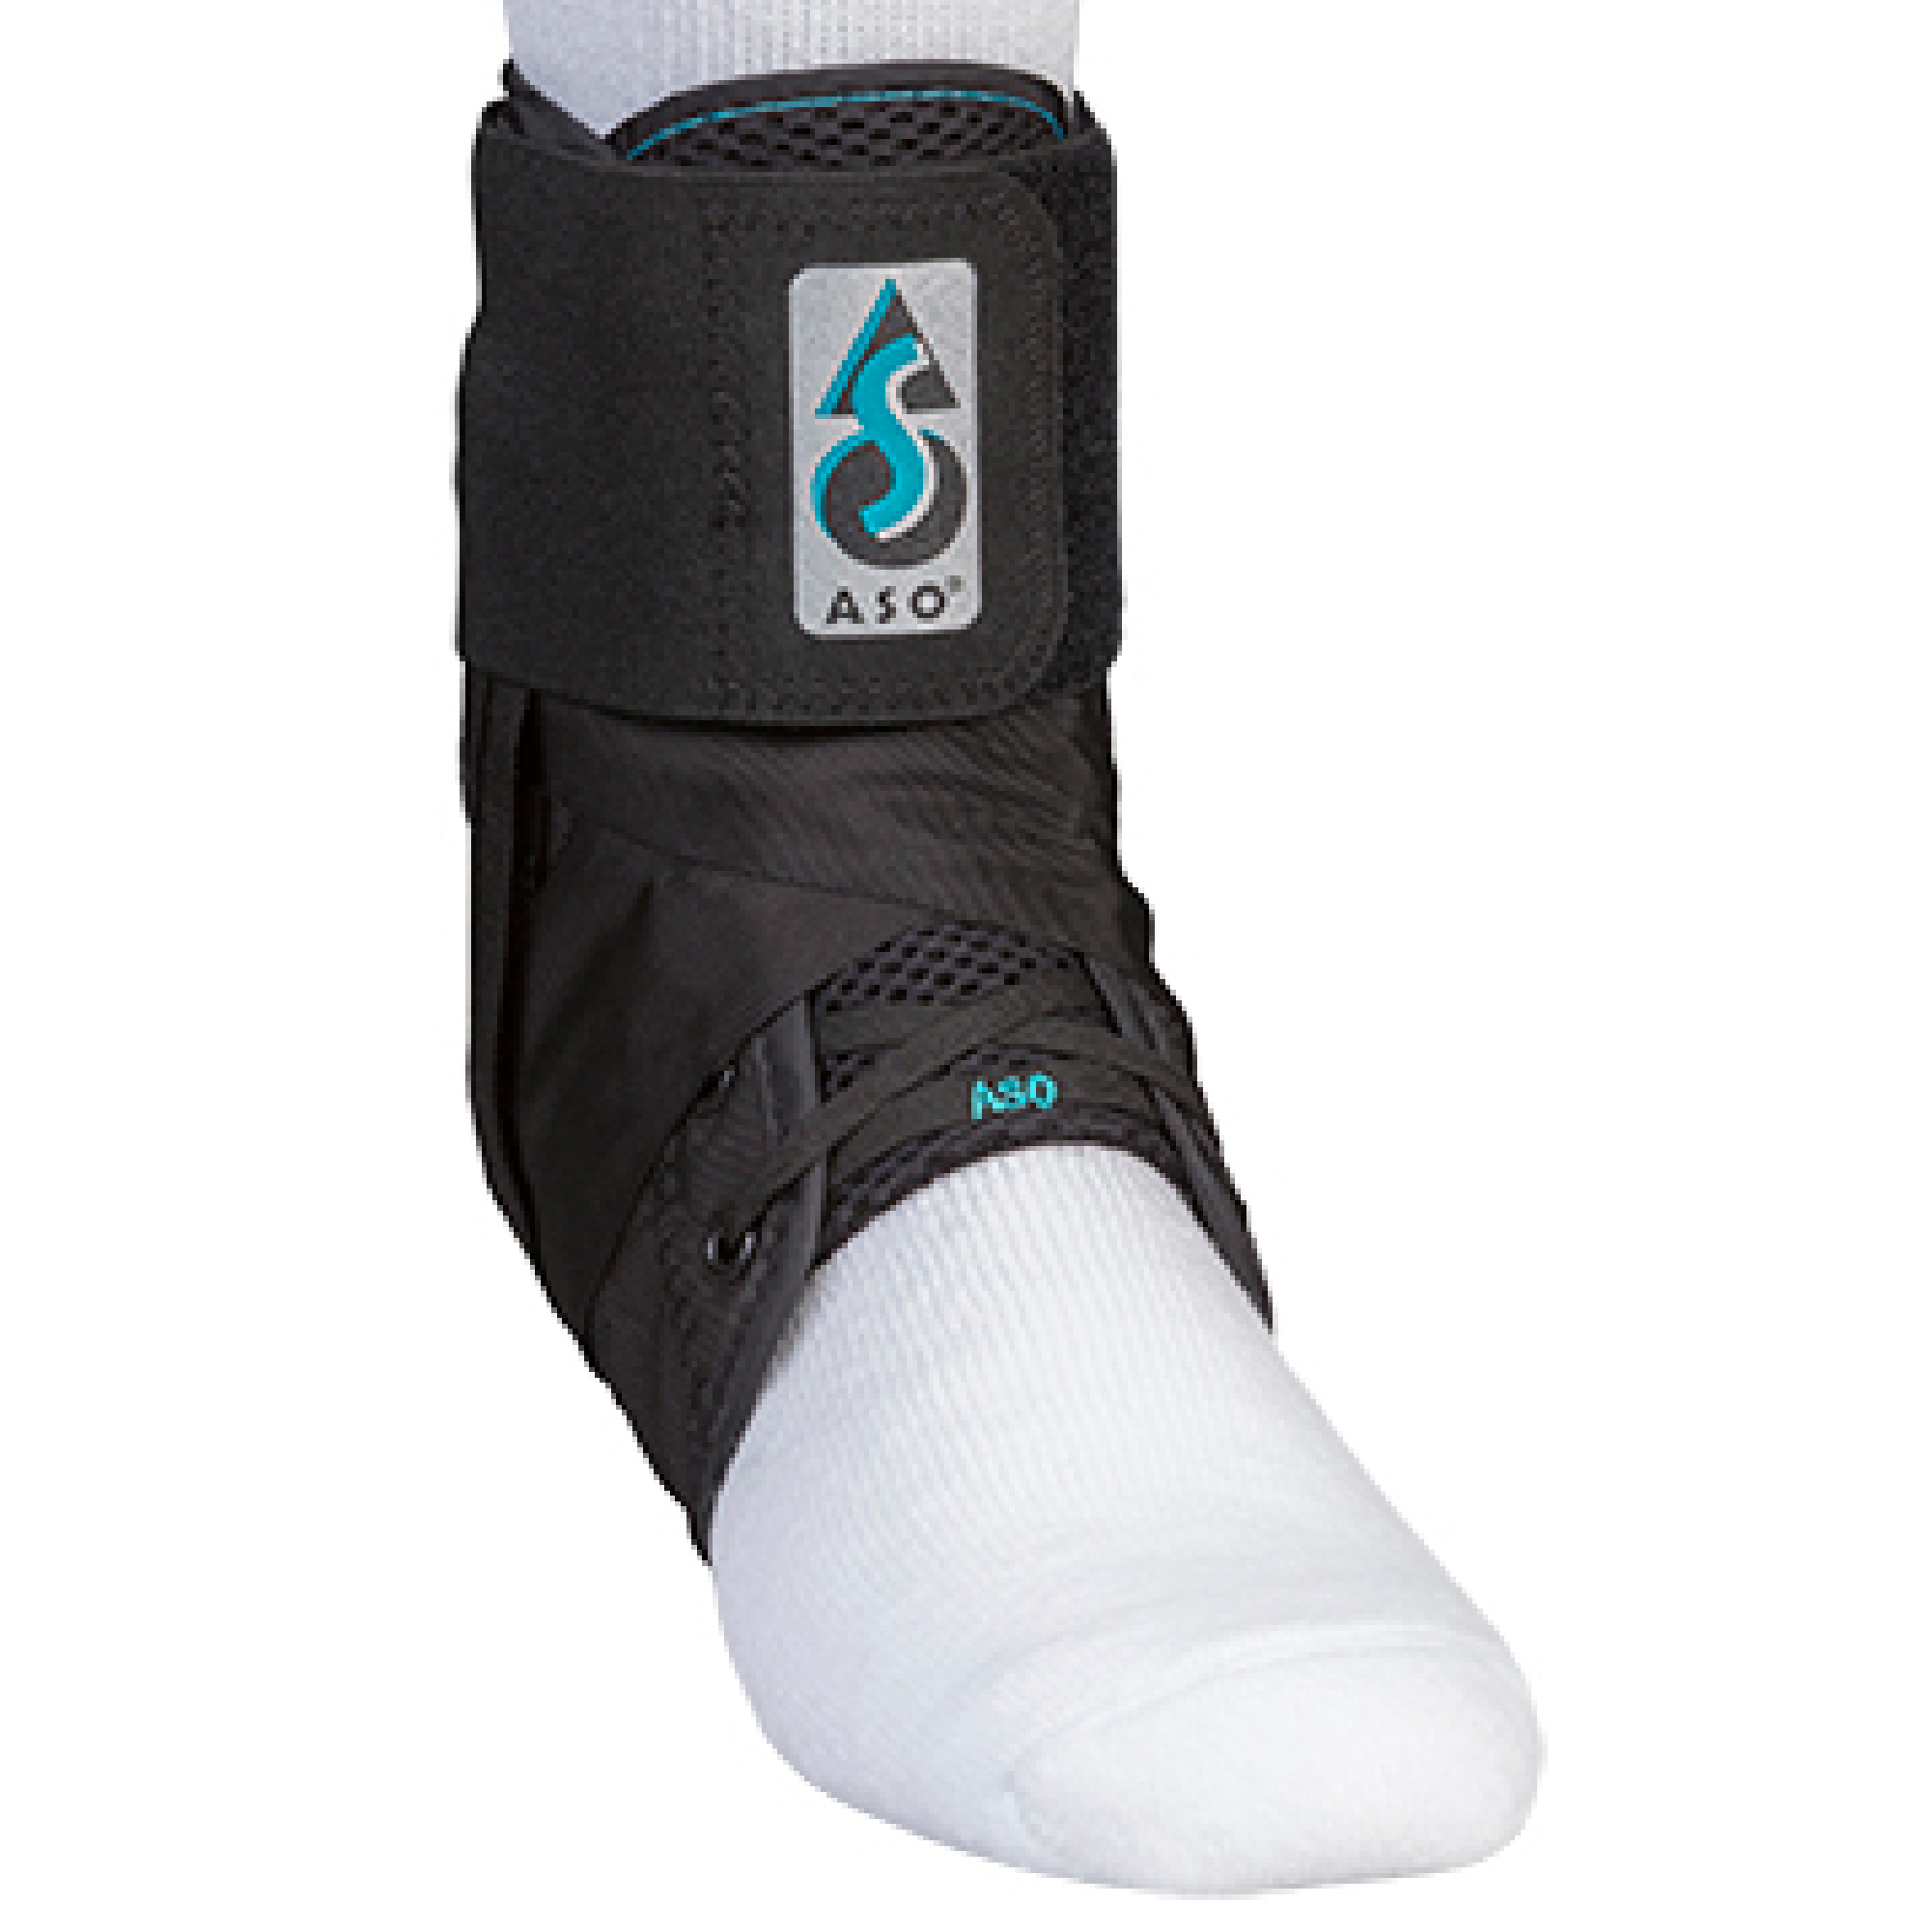 KNOSSOS Shuoxin Sx562 Elastic Ankle Foot Brace Support Wrap For Basketball Sports 